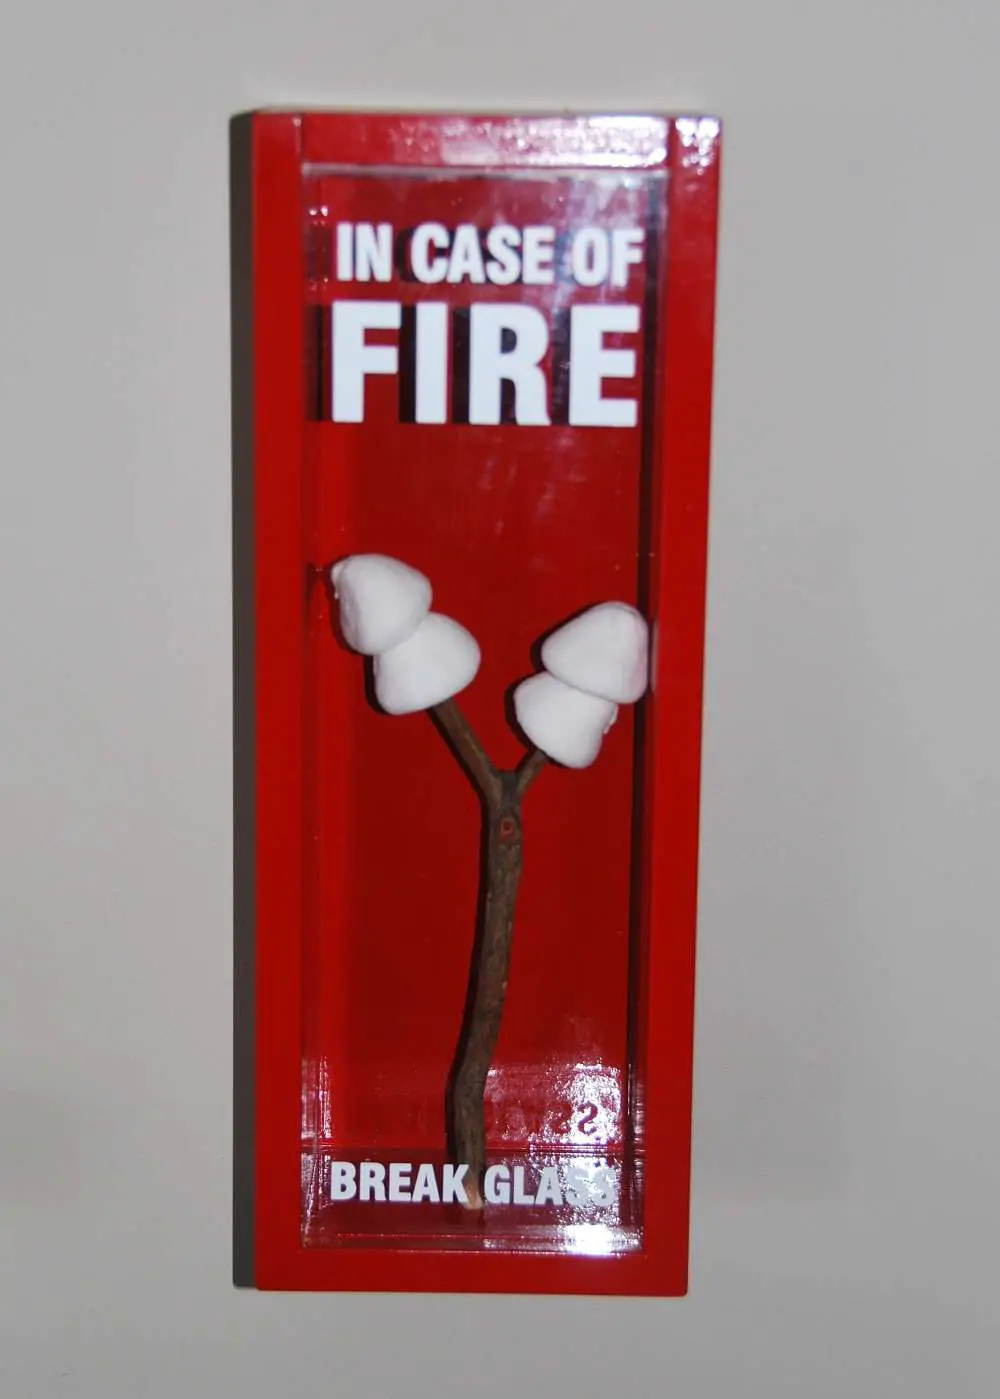 In Case Of Fire | Funny Signs | In Case Of Fire - Break Glass Here For... | Funny Signs | Author: Anthony Bianco - The Travel Tart Blog